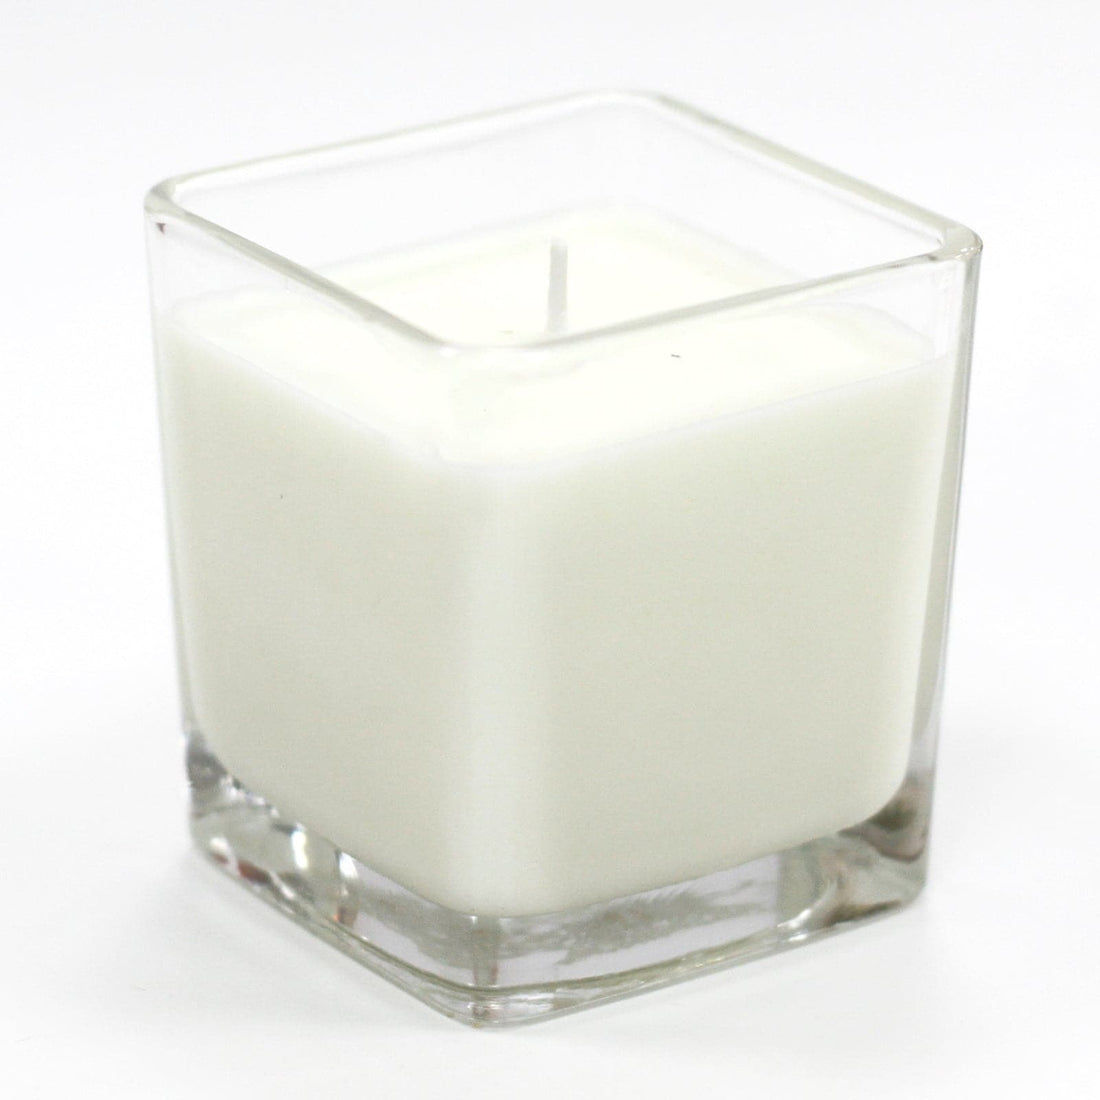 White Label Soy Wax Jar Candle - Cucumber & Mint - best price from Maltashopper.com WLSOYC-05